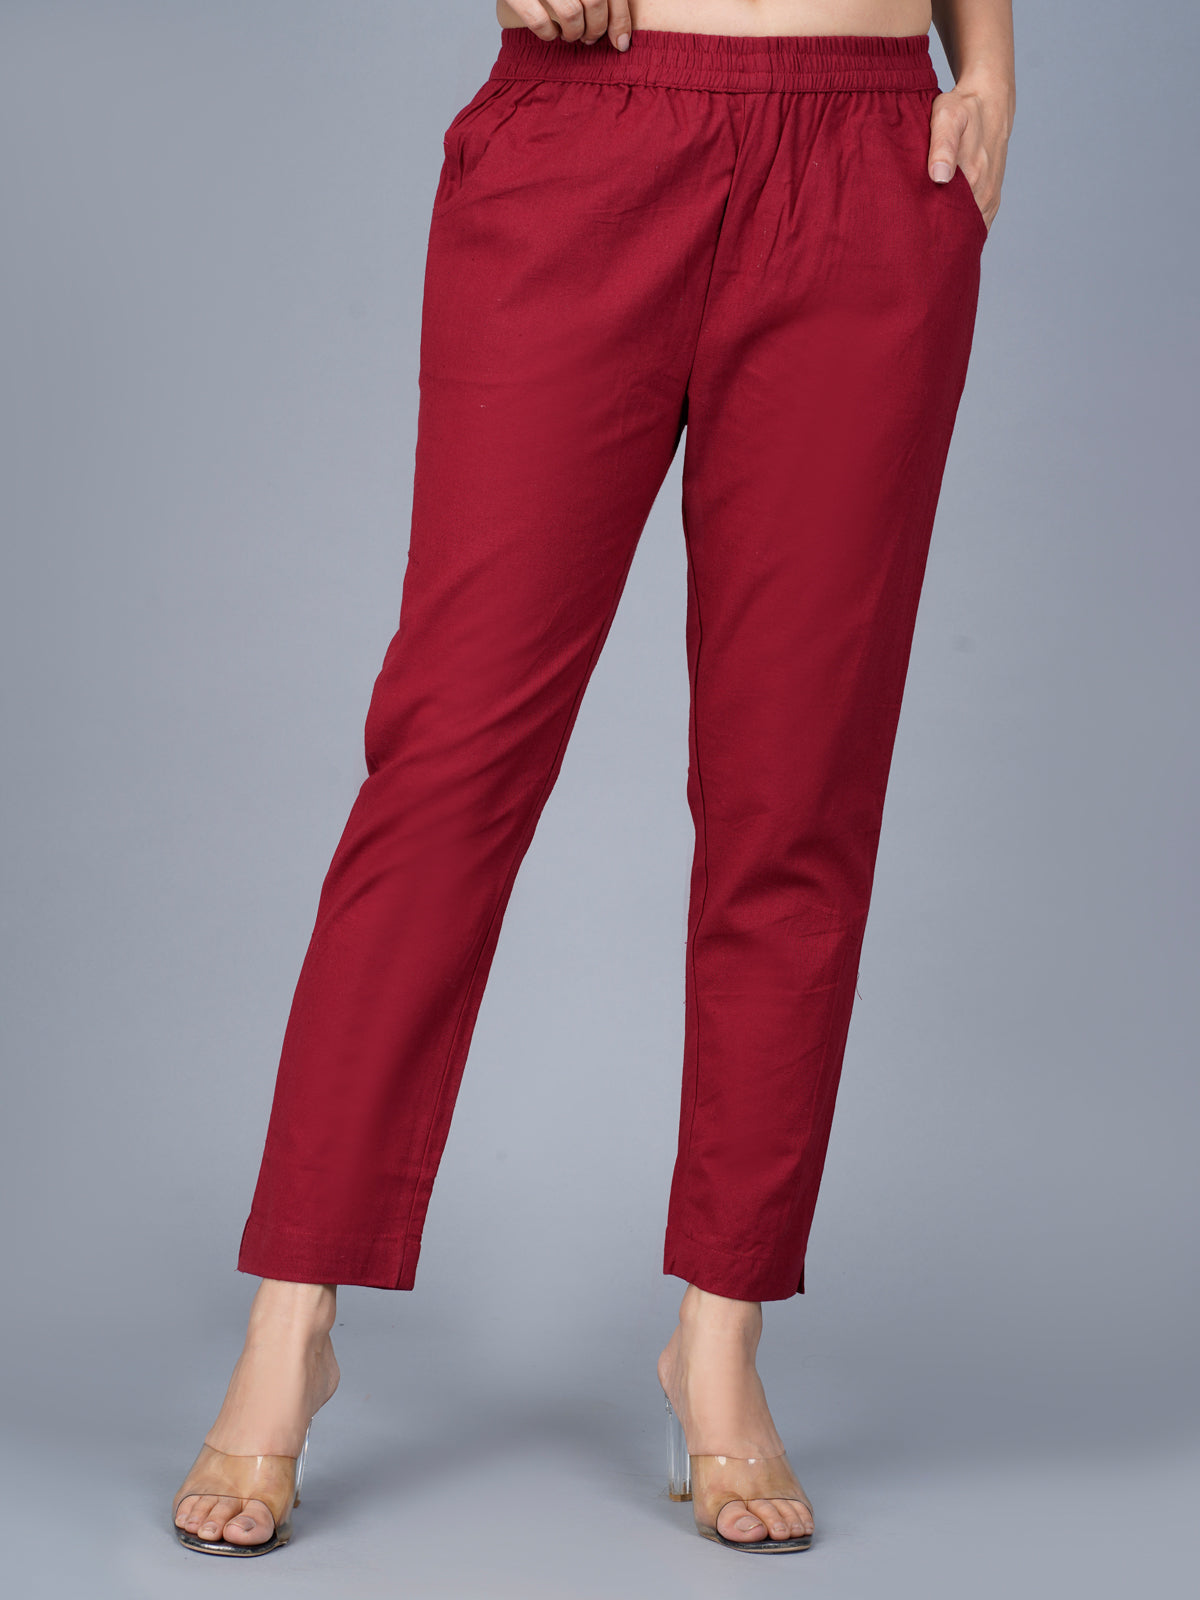 Pack Of 2 Womens Regular Fit Grey And Maroon Fully Elastic Waistband Cotton Trouser